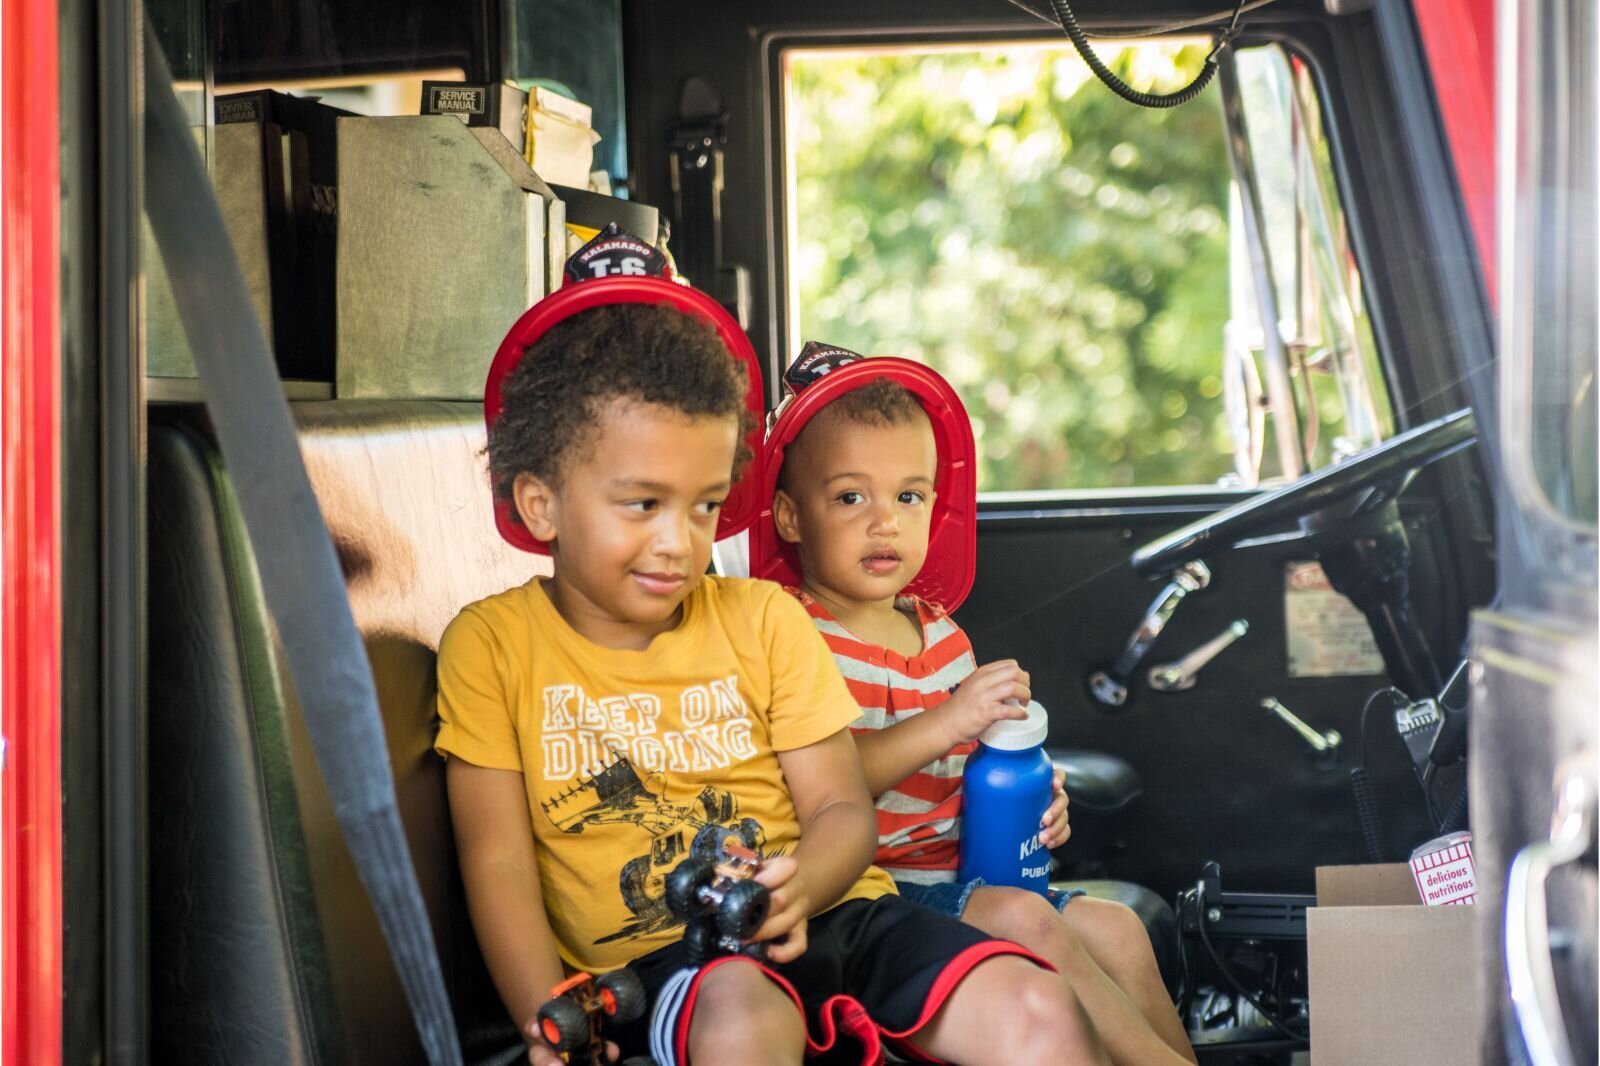 Fire trucks were on hand and youngsters put on fire hats as they sat up in the driver's seat. Photo by Fran Dwight.